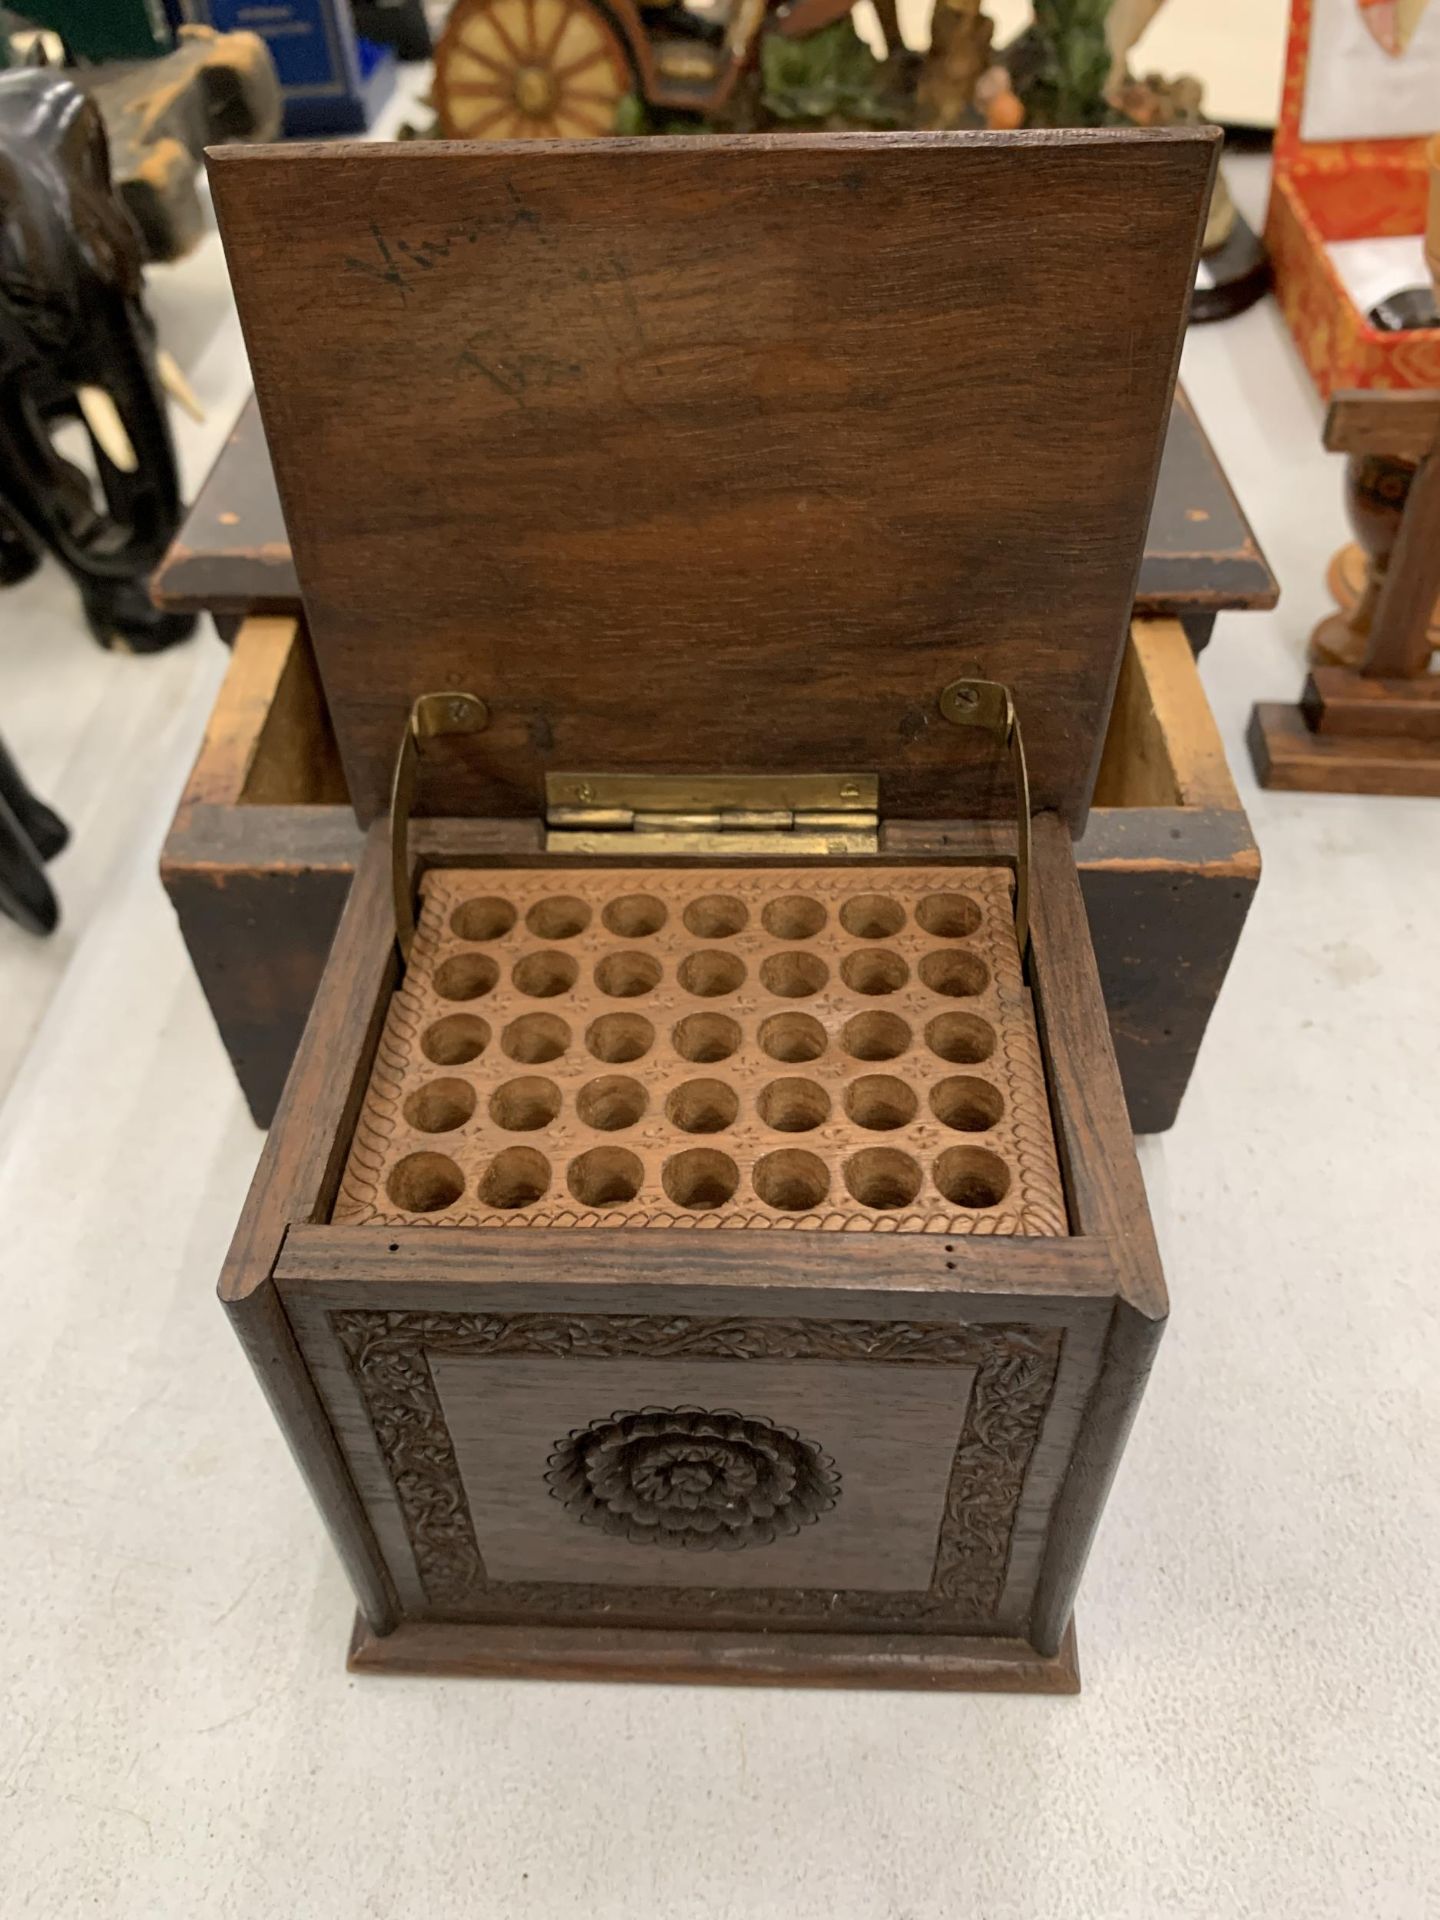 TWO VINTAGE WOODEN BOXES TO INCLUDE A CIGARETTE DISPENSER - Image 3 of 3